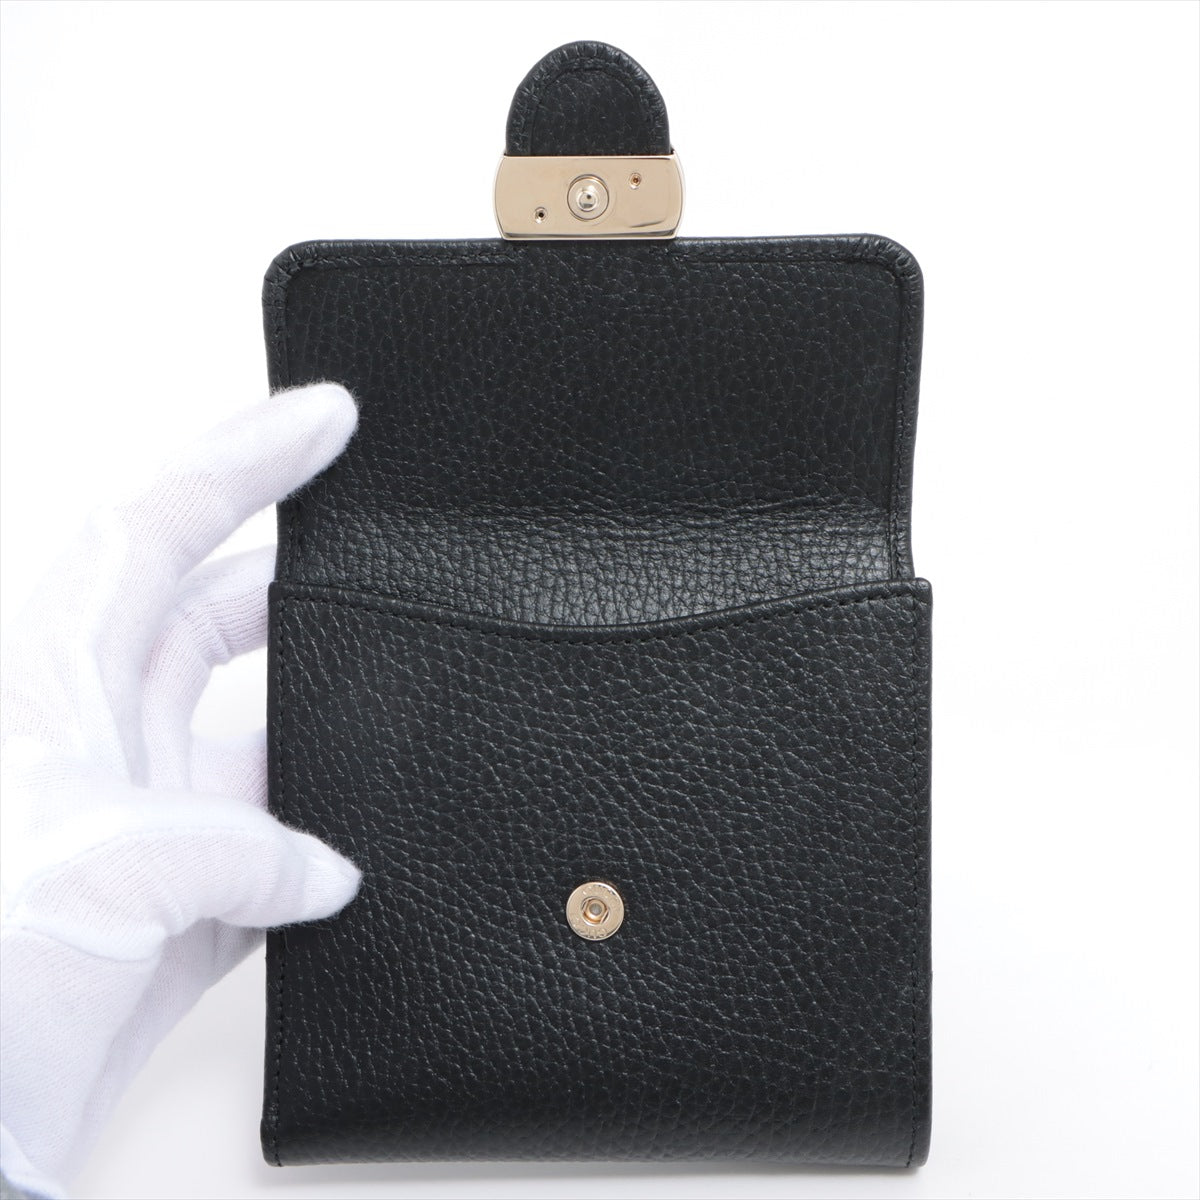 Gucci Interlocking G 615525 Leather Compact Wallet Black